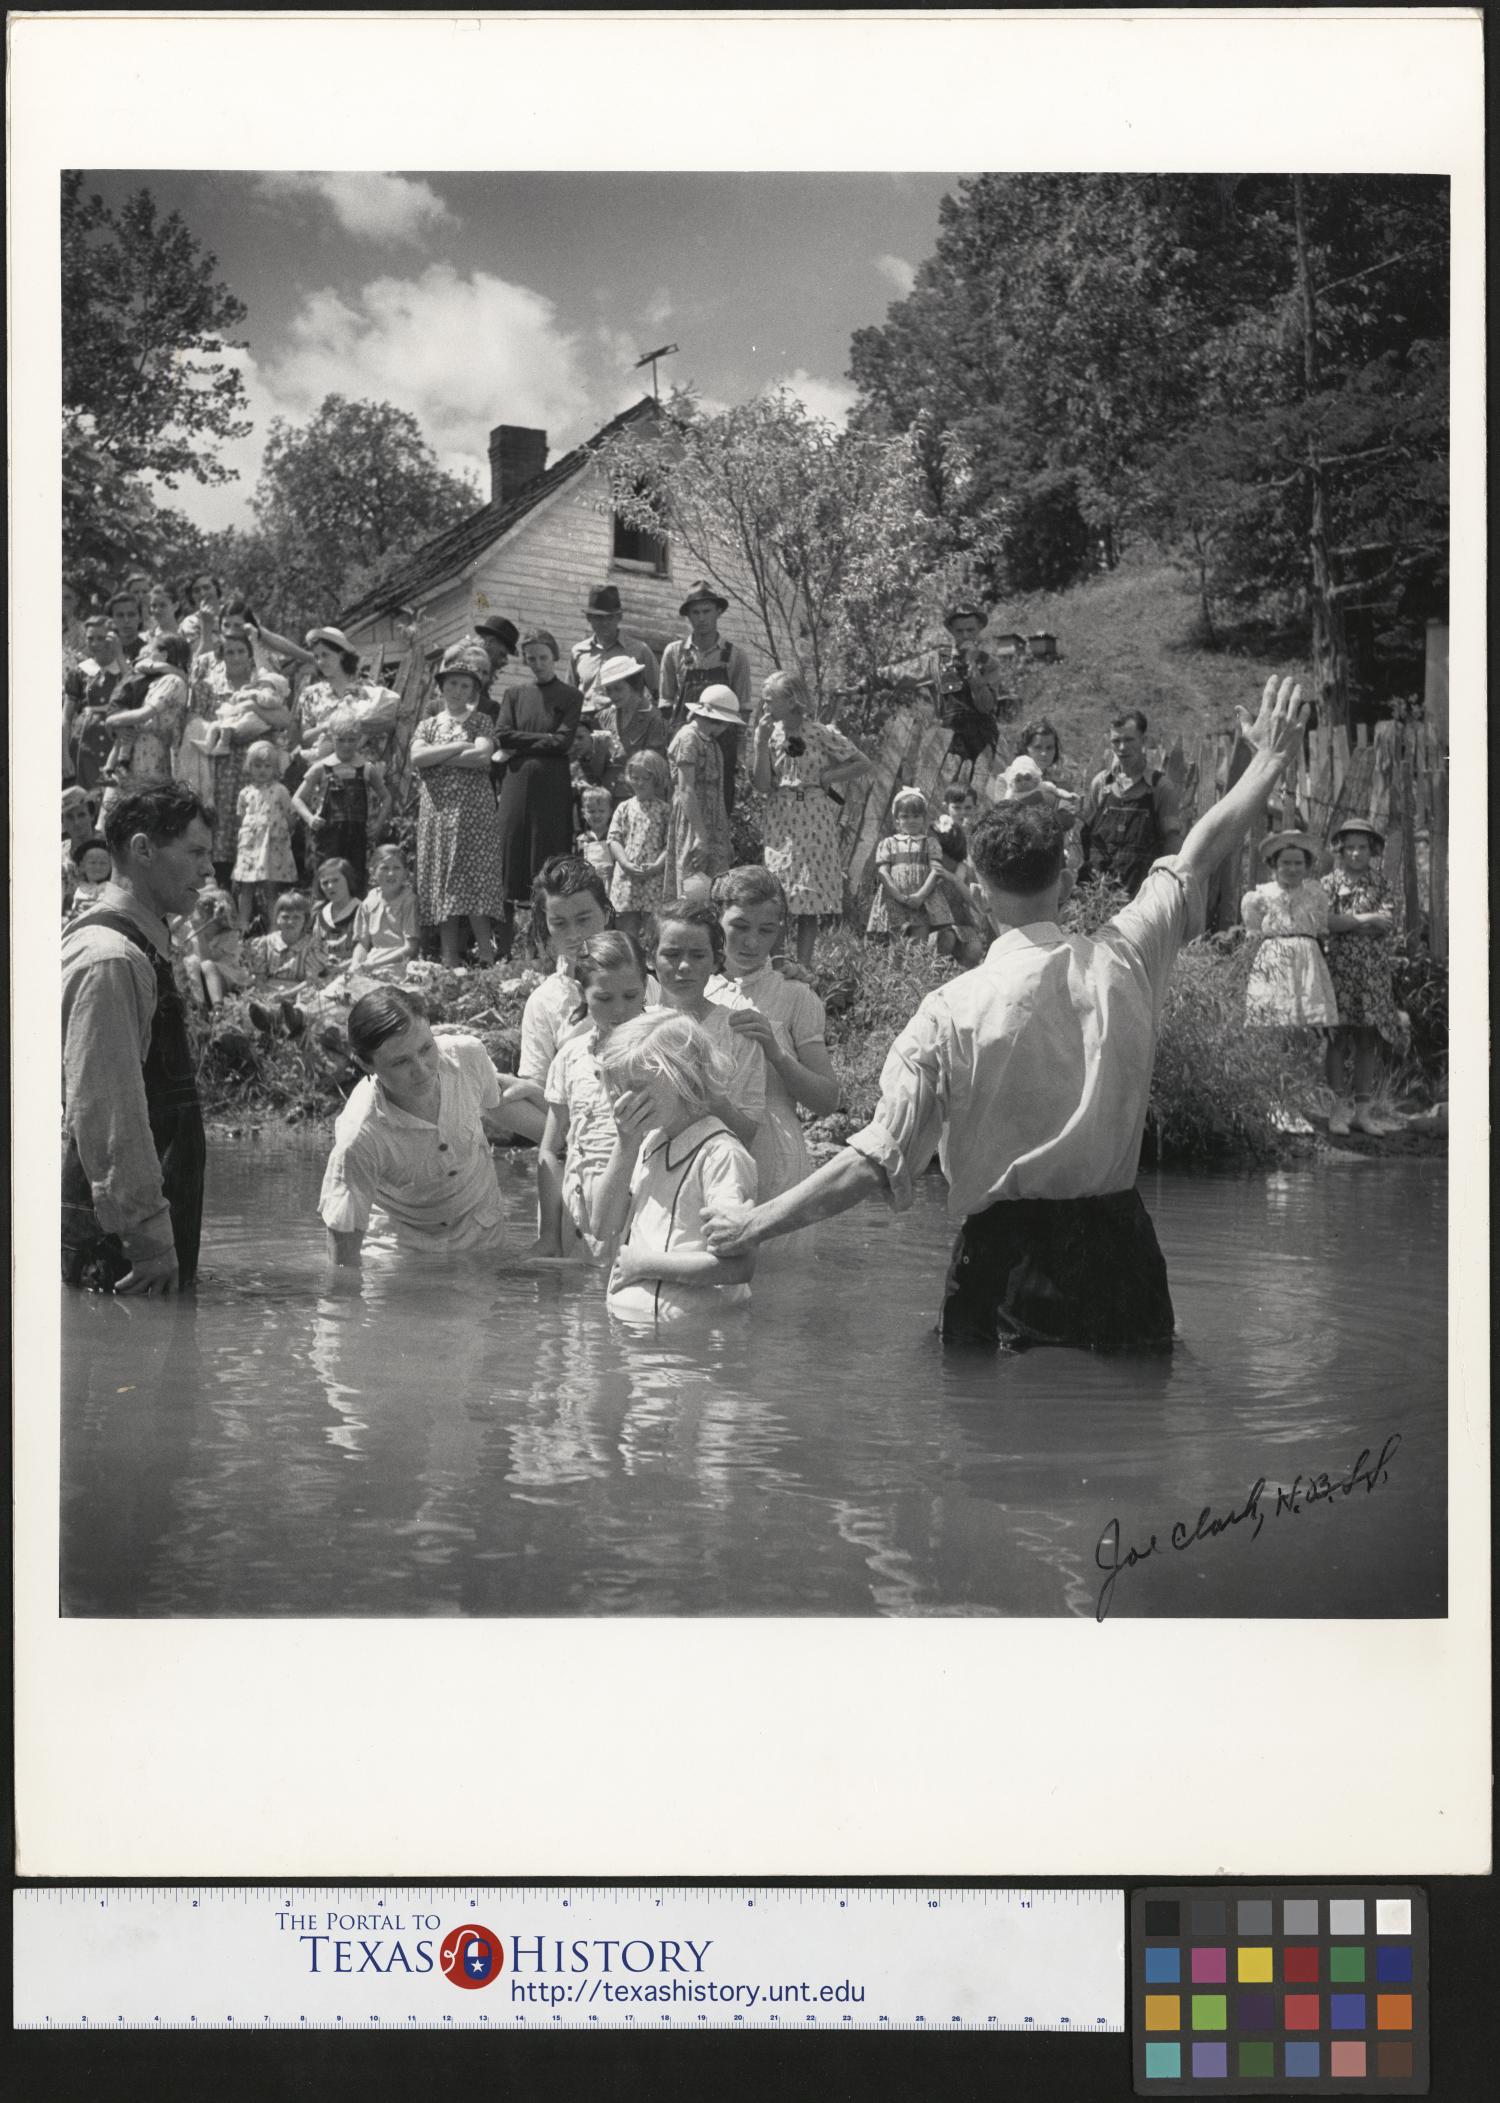 [Baptising in Olde Towne Creek], Photograph of the baptism of Ivana Wright, who is standing a creek next to Preacher Hugh Vancel; Vancel is facing the bank and raising one of his hands toward the crowd standing on the bank. Immediately behind them, Hester Welch, Minnie Hicks, Cleo McCurey, Lilian Hicks, and Lenore Treece are also in the creek, standing in line. The baptisms took place int he Olde Towne Creek outside John Owens home in Red Hill, Tennessee., 